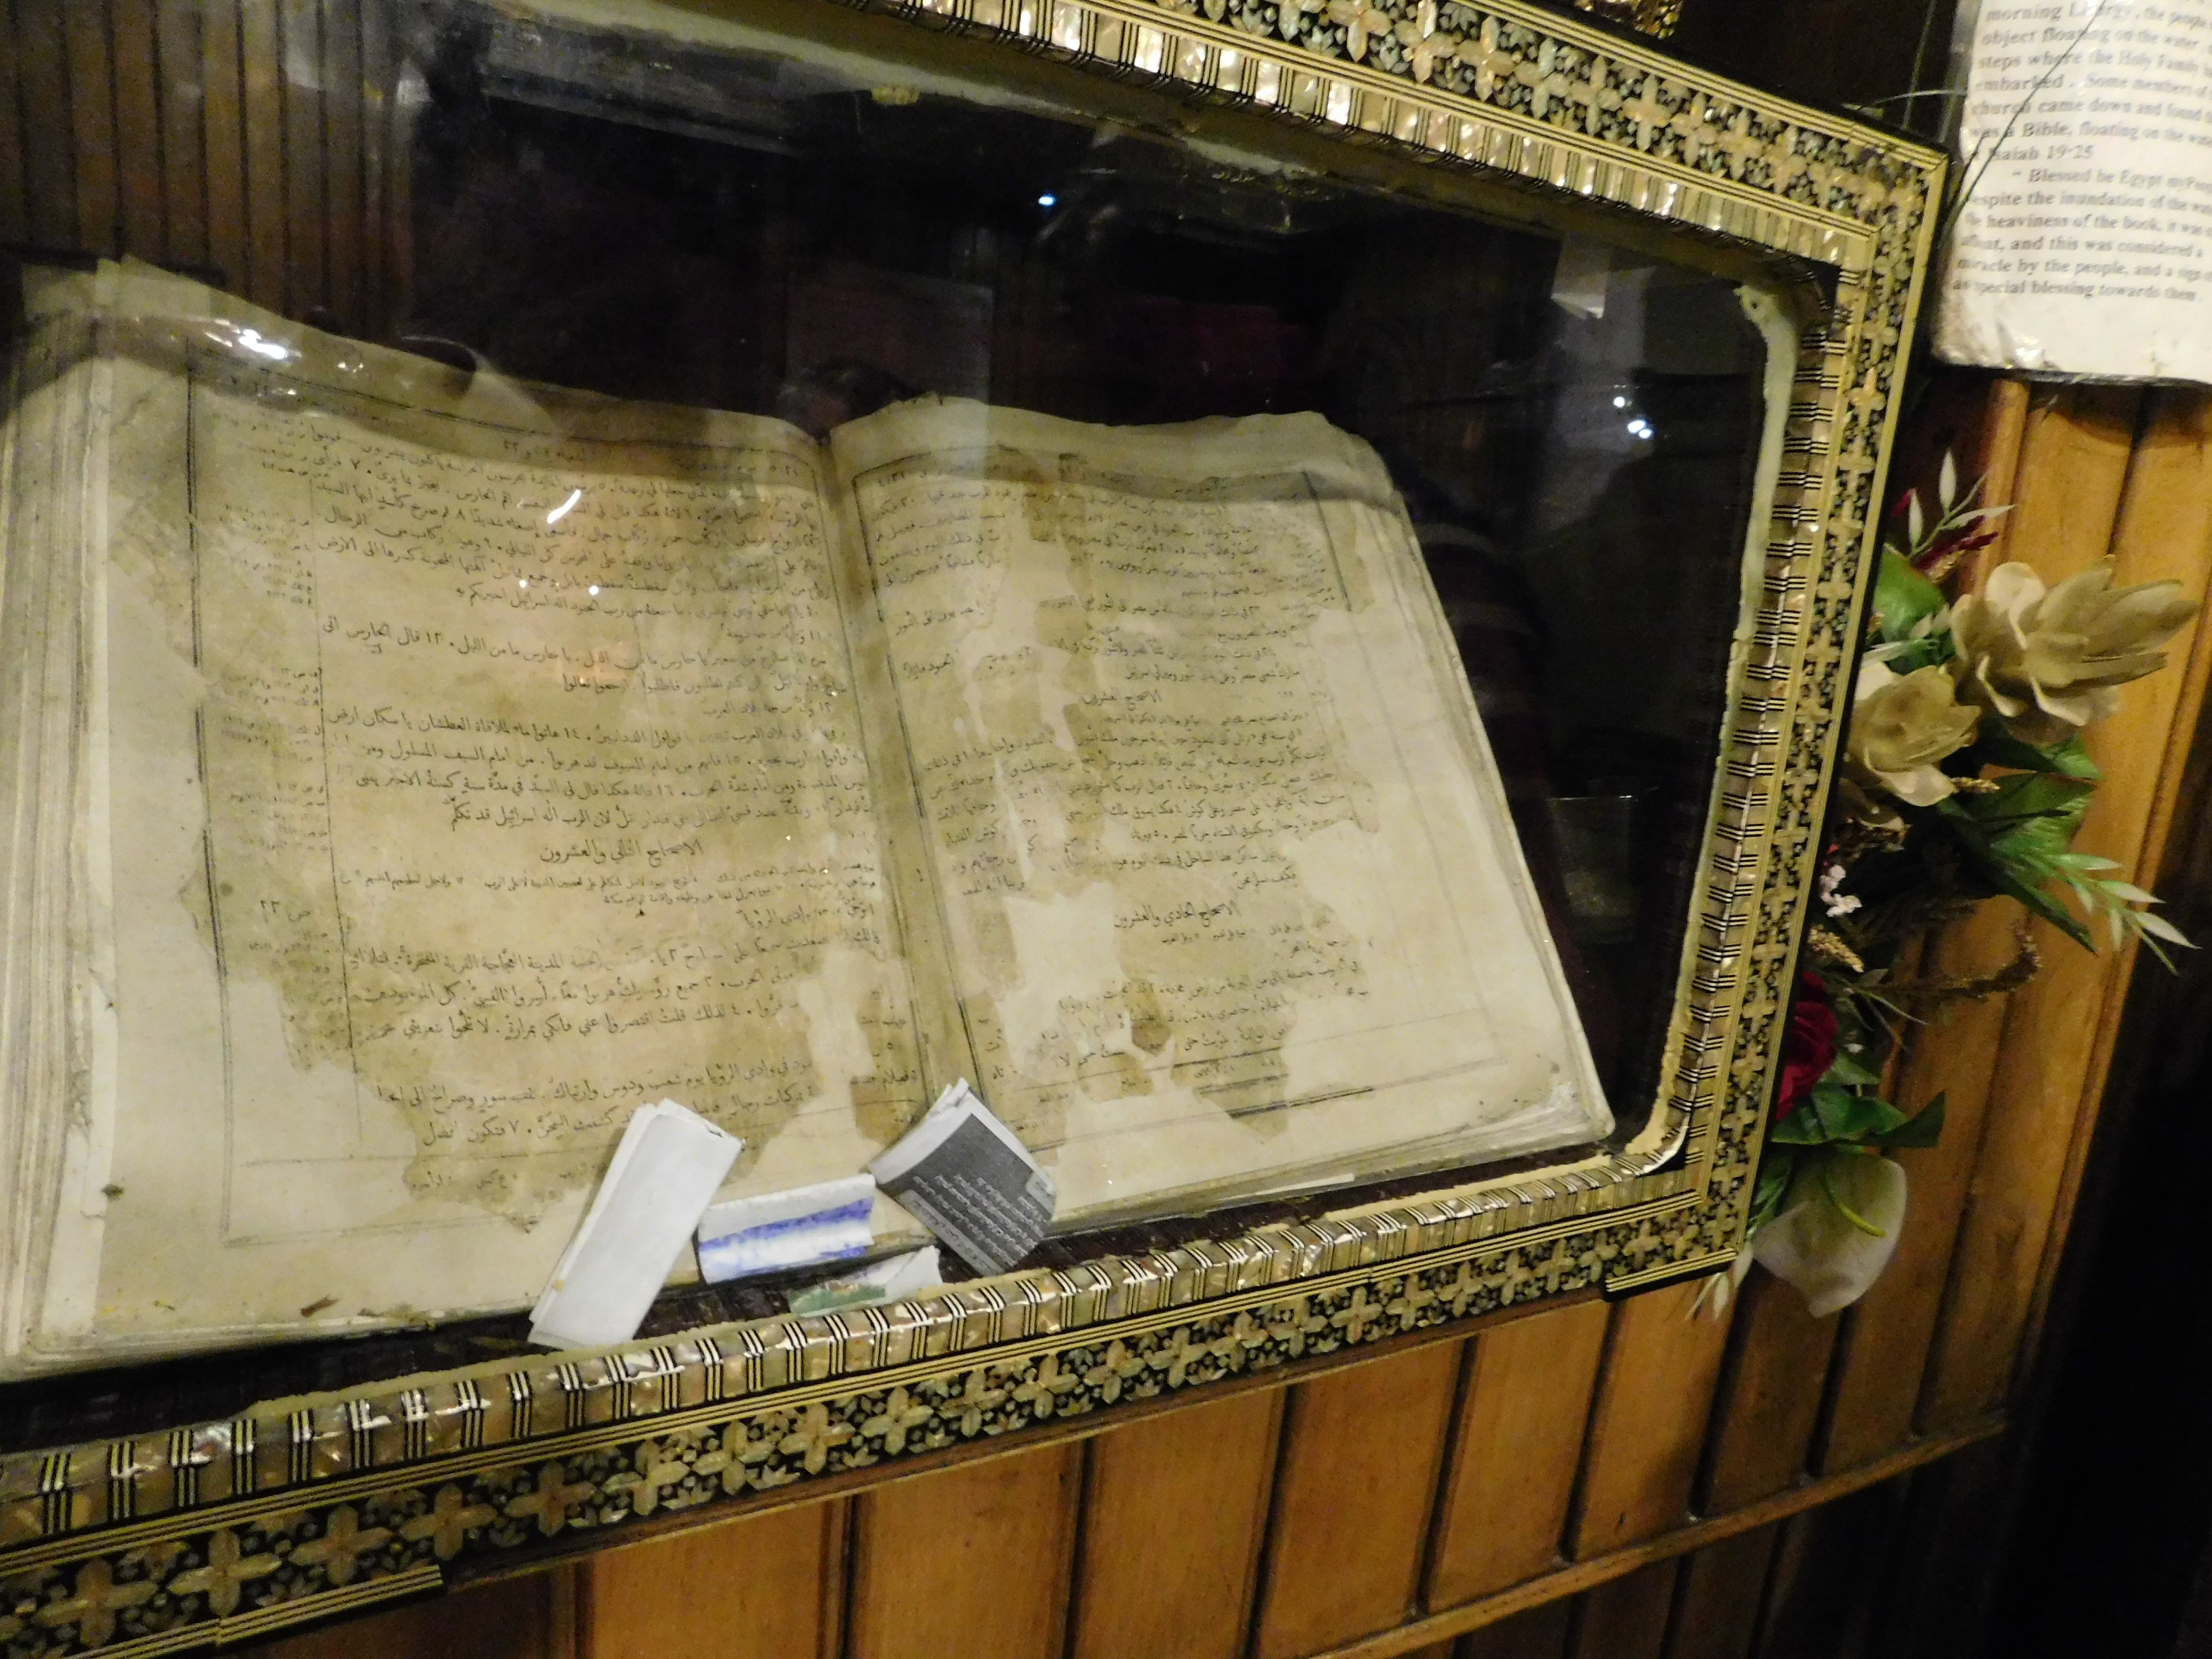 FLOATING BIBLE displayed
at St. Mary Church open to 
page that says I Love Egype my people
